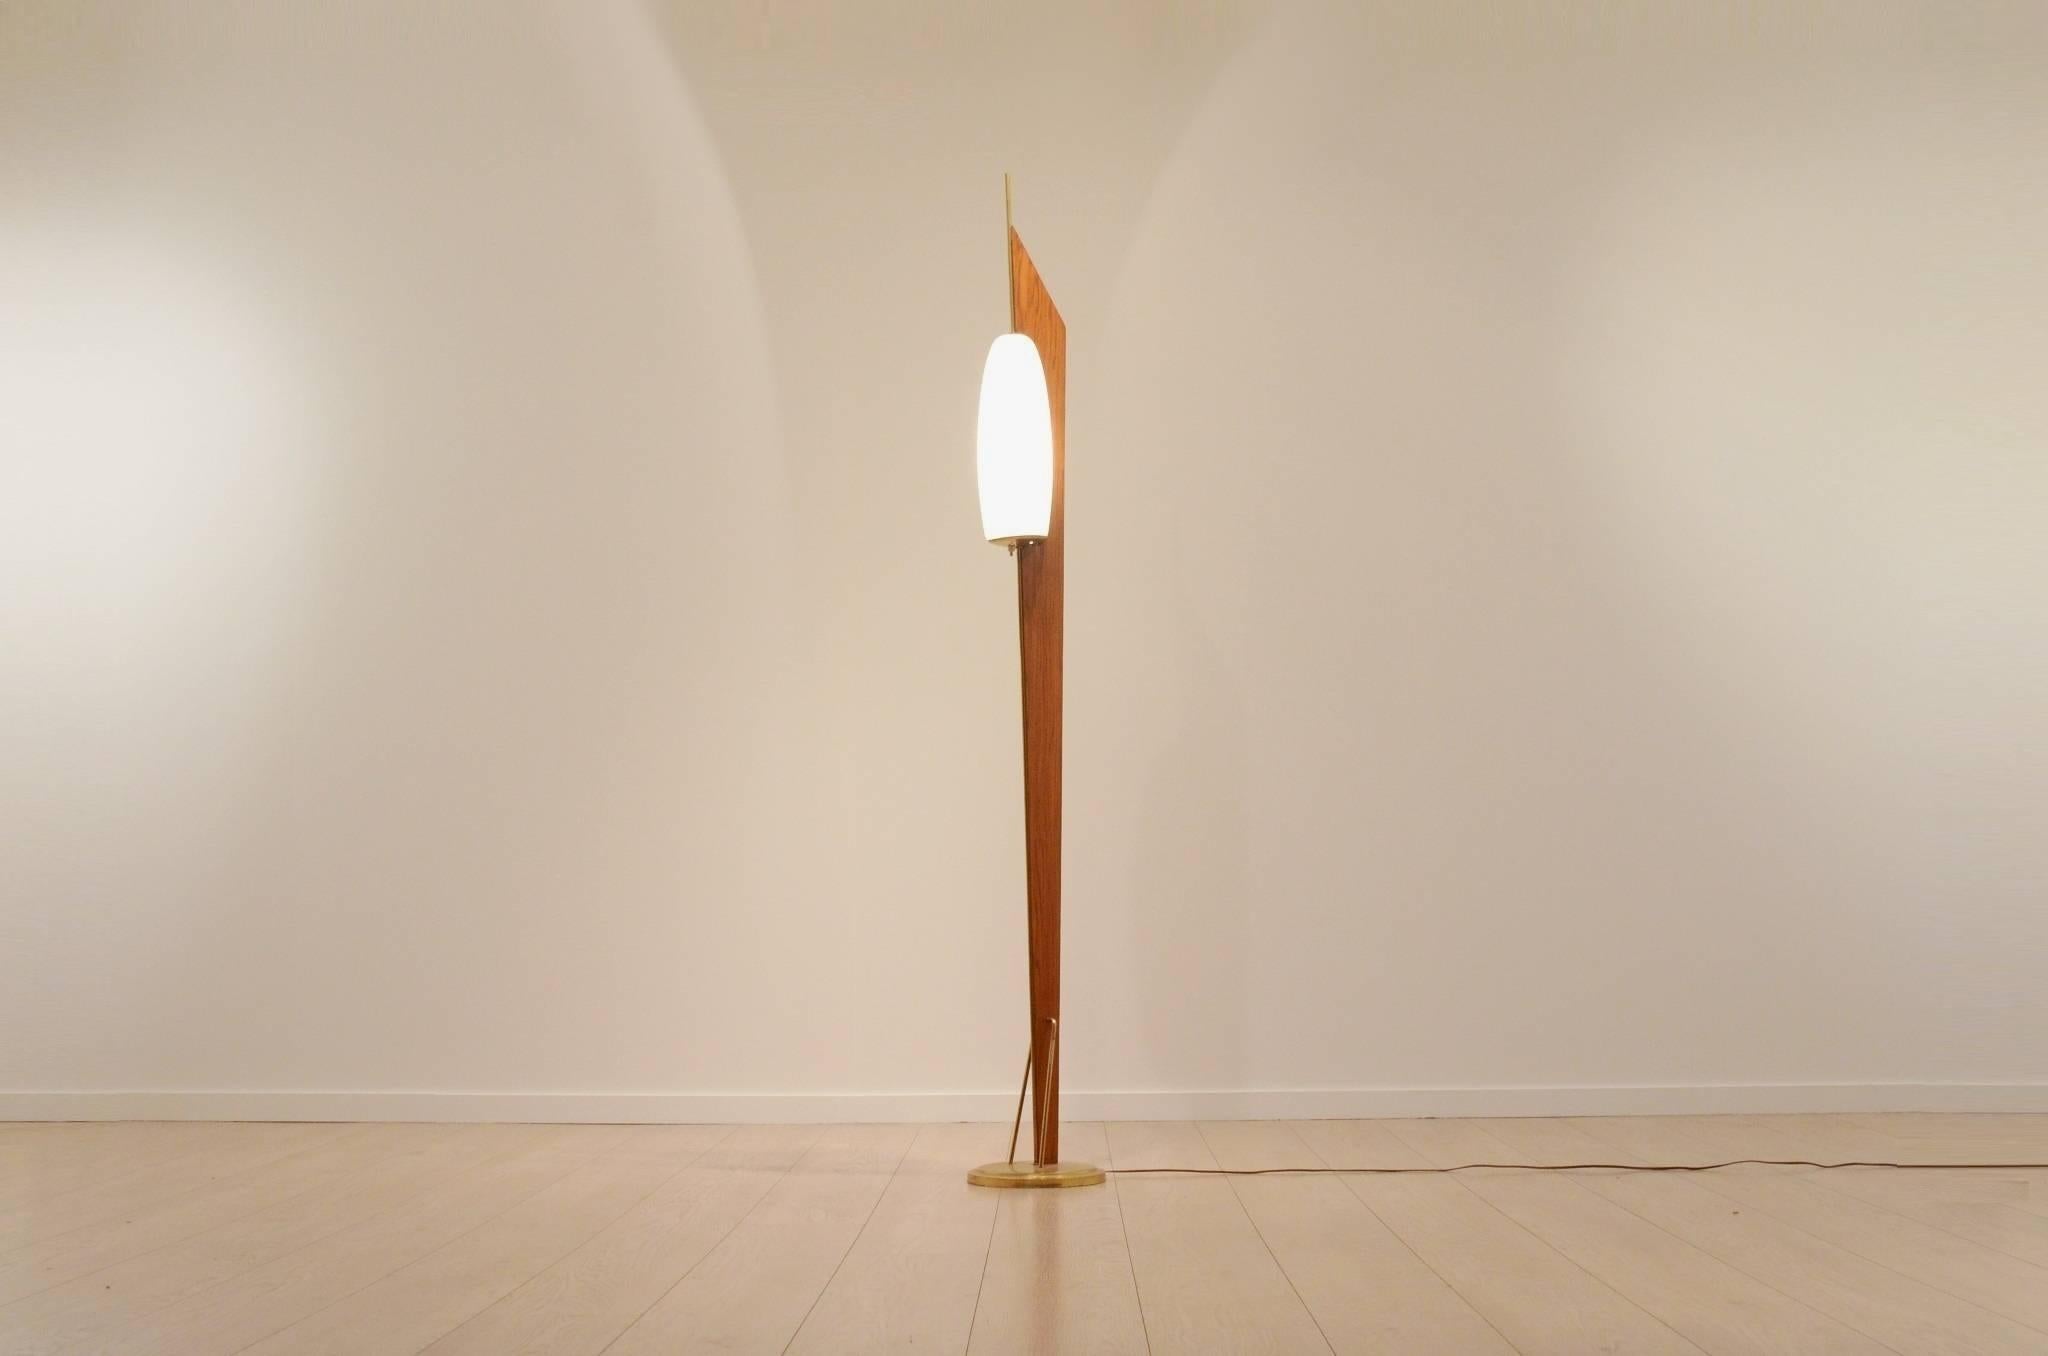 Floor lamp with a cocoon shaped opalescent glass lamp shade supported by brass rods.  

They are connected to a wooden blade that forms the structure of the lamp, and the brass base. 

The lamp switch is discreetly placed at the bottom of the